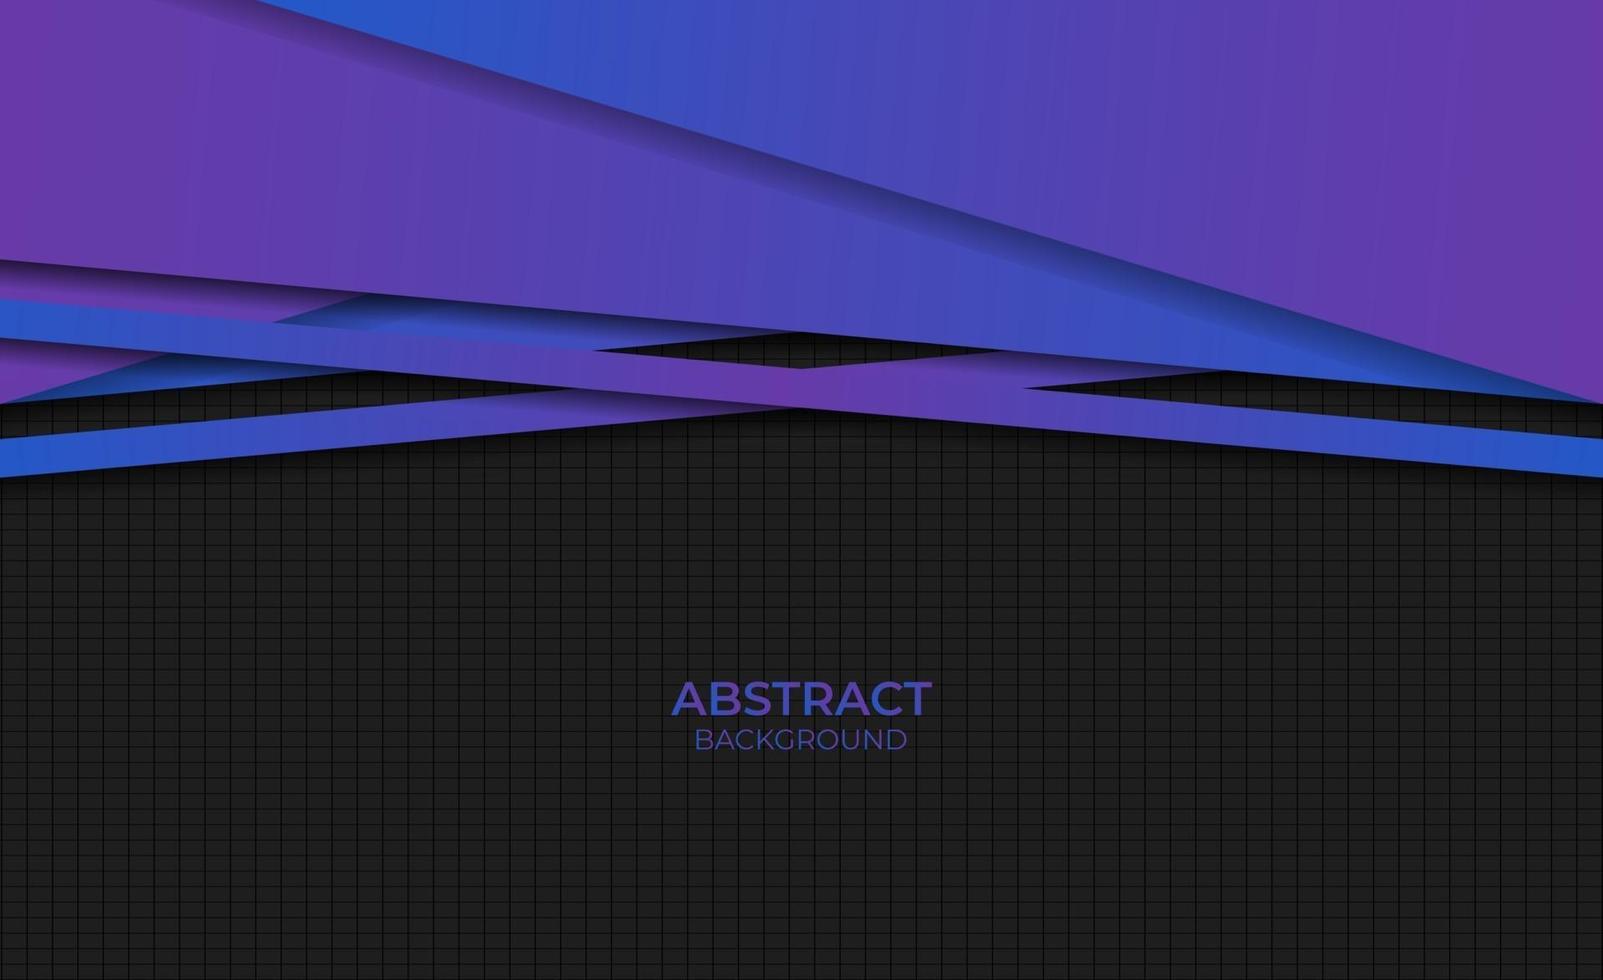 Abstract Background Gradient Style Purple Blue Design vector